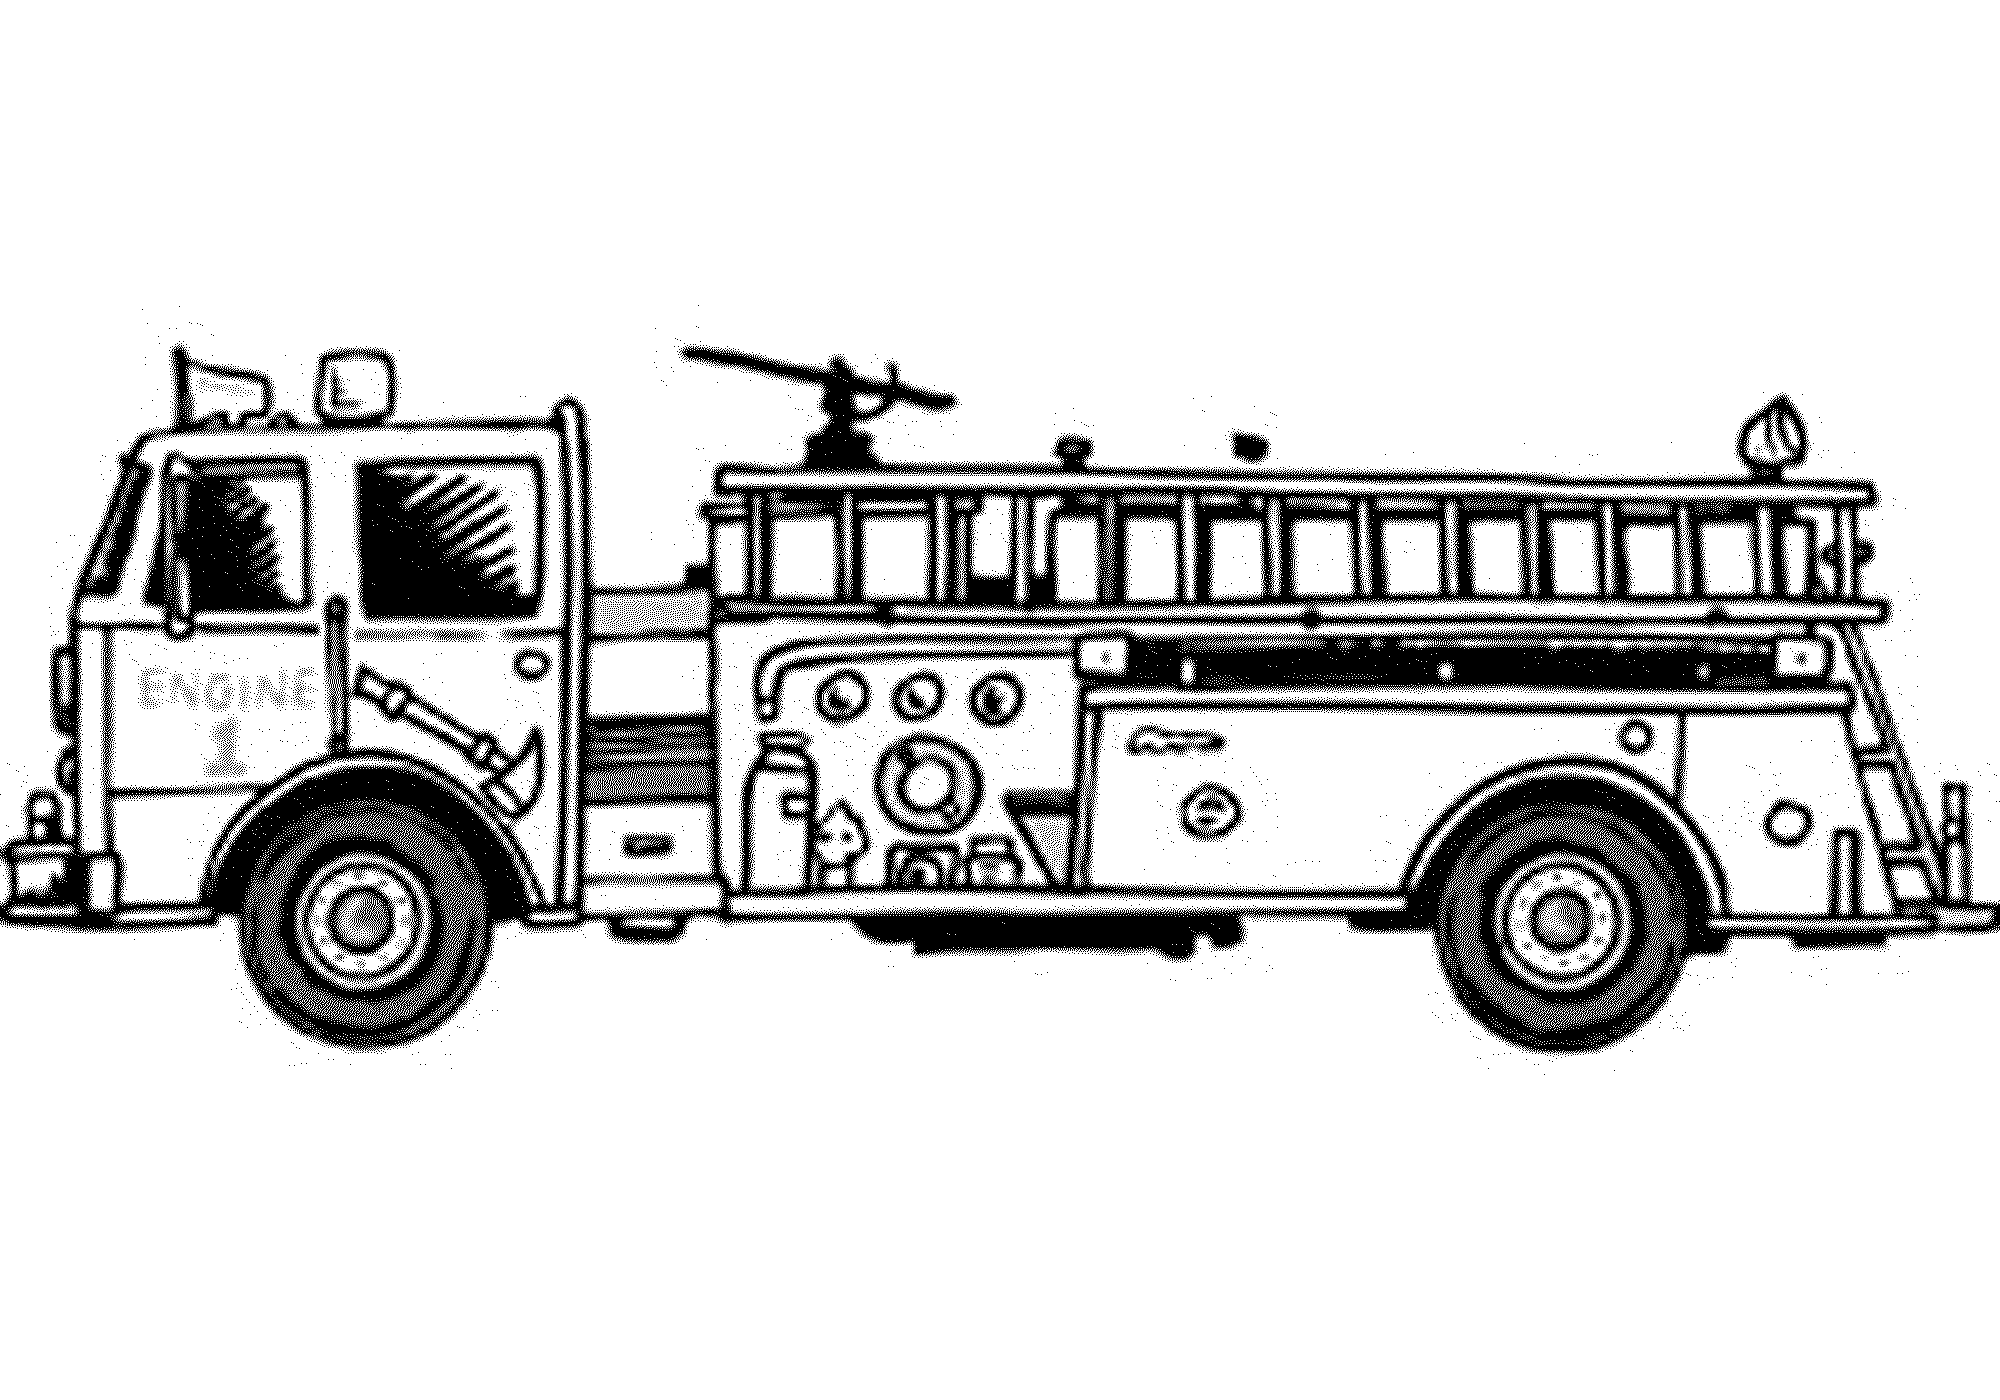 Print & Download Educational Fire Truck Coloring Pages Giving Three